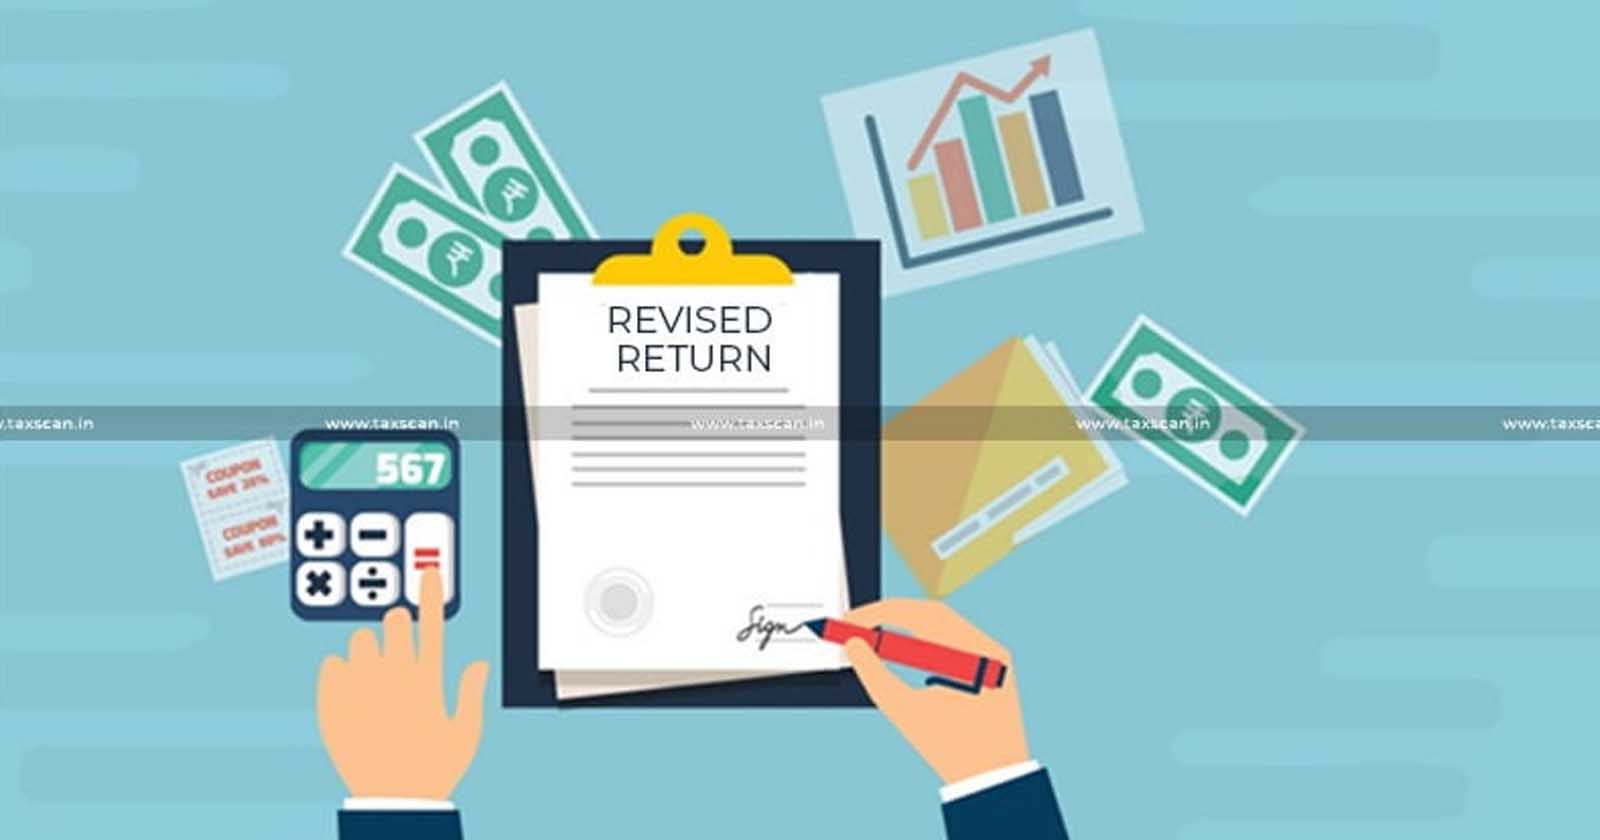 Income Tax - Refund Claim - Delhi High Court - Revised Return - Assessee - taxscan